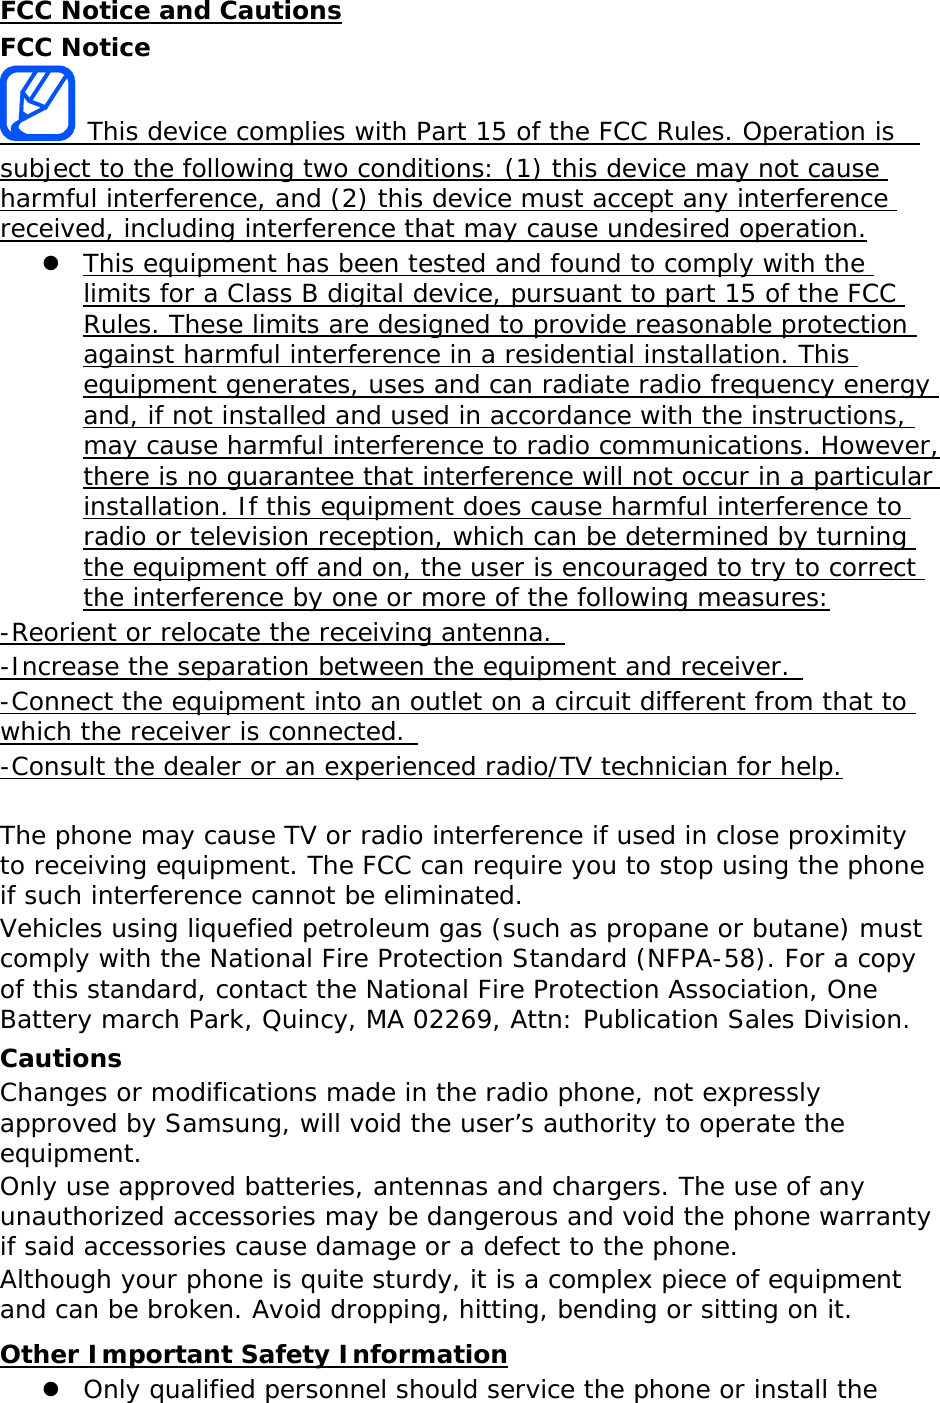 FCC Notice and Cautions FCC Notice  This device complies with Part 15 of the FCC Rules. Operation is  subject to the following two conditions: (1) this device may not cause harmful interference, and (2) this device must accept any interference received, including interference that may cause undesired operation.  This equipment has been tested and found to comply with the limits for a Class B digital device, pursuant to part 15 of the FCC Rules. These limits are designed to provide reasonable protection against harmful interference in a residential installation. This equipment generates, uses and can radiate radio frequency energy and, if not installed and used in accordance with the instructions, may cause harmful interference to radio communications. However, there is no guarantee that interference will not occur in a particular installation. If this equipment does cause harmful interference to radio or television reception, which can be determined by turning the equipment off and on, the user is encouraged to try to correct the interference by one or more of the following measures: -Reorient or relocate the receiving antenna.  -Increase the separation between the equipment and receiver.  -Connect the equipment into an outlet on a circuit different from that to which the receiver is connected.  -Consult the dealer or an experienced radio/TV technician for help.  The phone may cause TV or radio interference if used in close proximity to receiving equipment. The FCC can require you to stop using the phone if such interference cannot be eliminated. Vehicles using liquefied petroleum gas (such as propane or butane) must comply with the National Fire Protection Standard (NFPA-58). For a copy of this standard, contact the National Fire Protection Association, One Battery march Park, Quincy, MA 02269, Attn: Publication Sales Division. Cautions Changes or modifications made in the radio phone, not expressly approved by Samsung, will void the user’s authority to operate the equipment. Only use approved batteries, antennas and chargers. The use of any unauthorized accessories may be dangerous and void the phone warranty if said accessories cause damage or a defect to the phone. Although your phone is quite sturdy, it is a complex piece of equipment and can be broken. Avoid dropping, hitting, bending or sitting on it. Other Important Safety Information  Only qualified personnel should service the phone or install the 